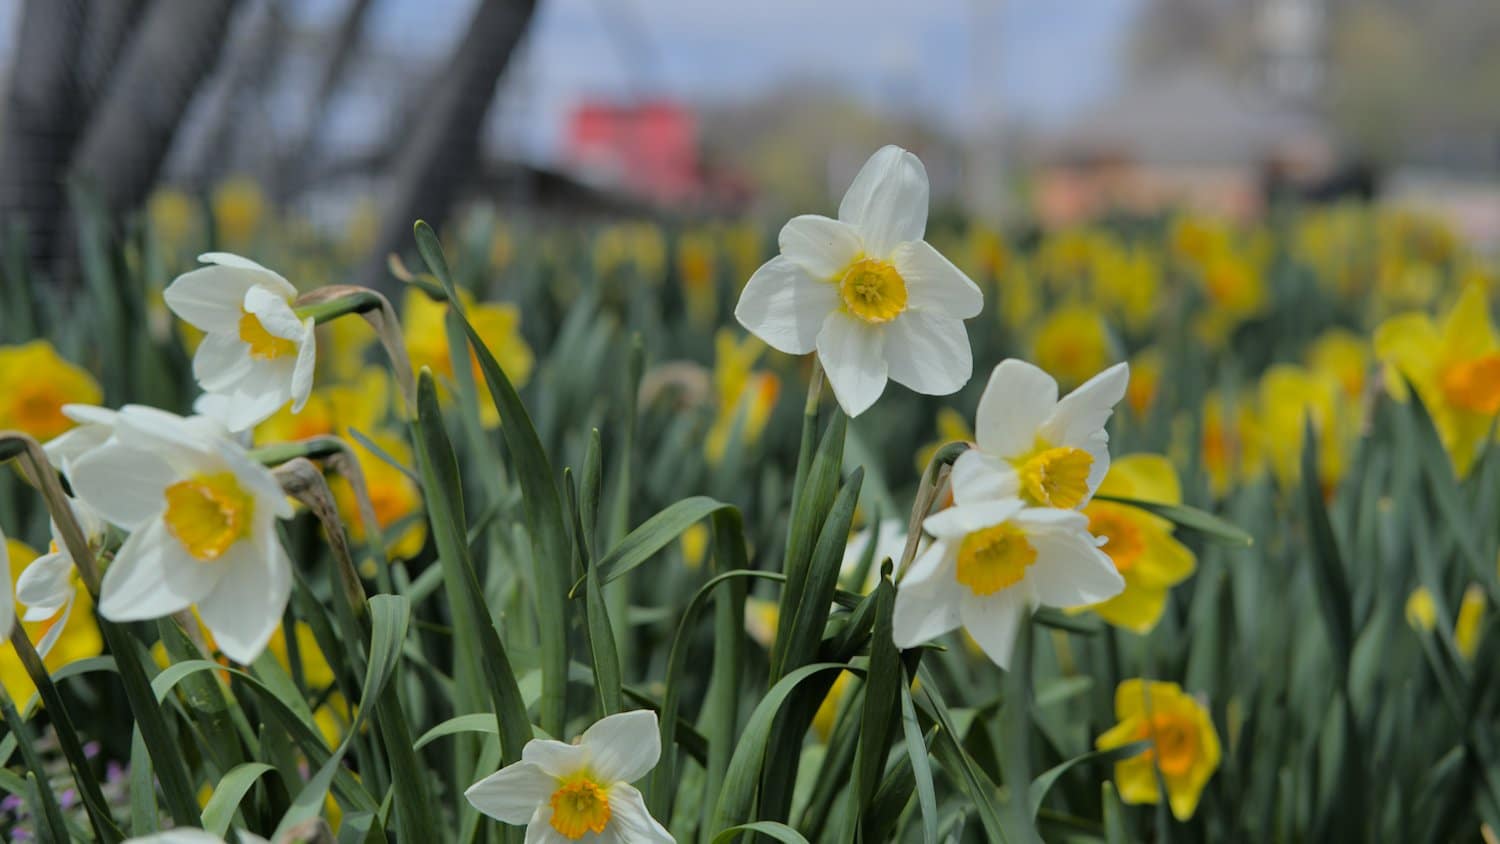 White and yellow daffodils.